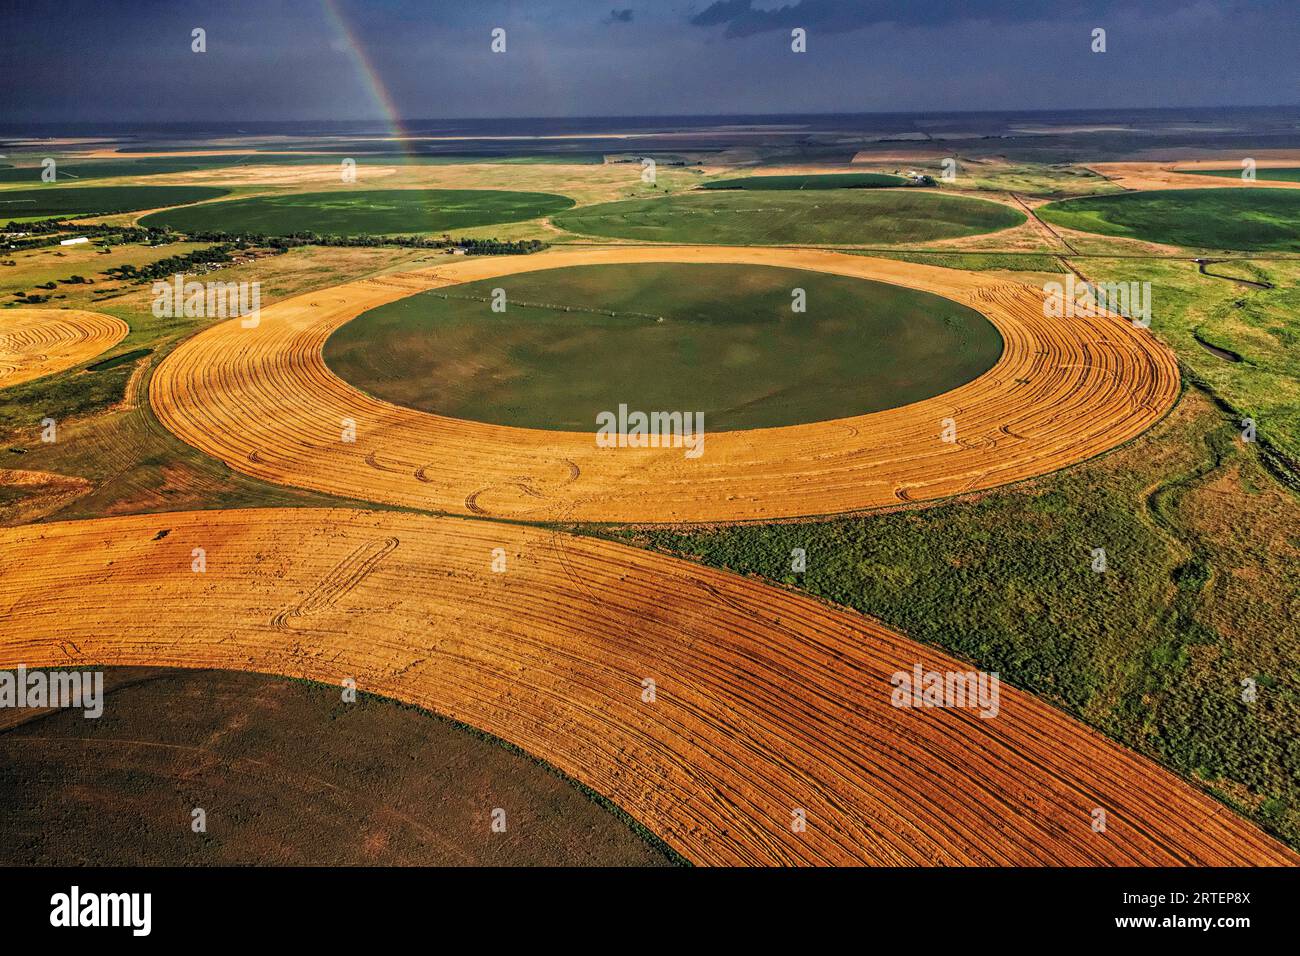 Center-pivot irrigation systems etch circles of grain and other plants in Finney County, Kansas.; Finney County, Kansas. Stock Photo